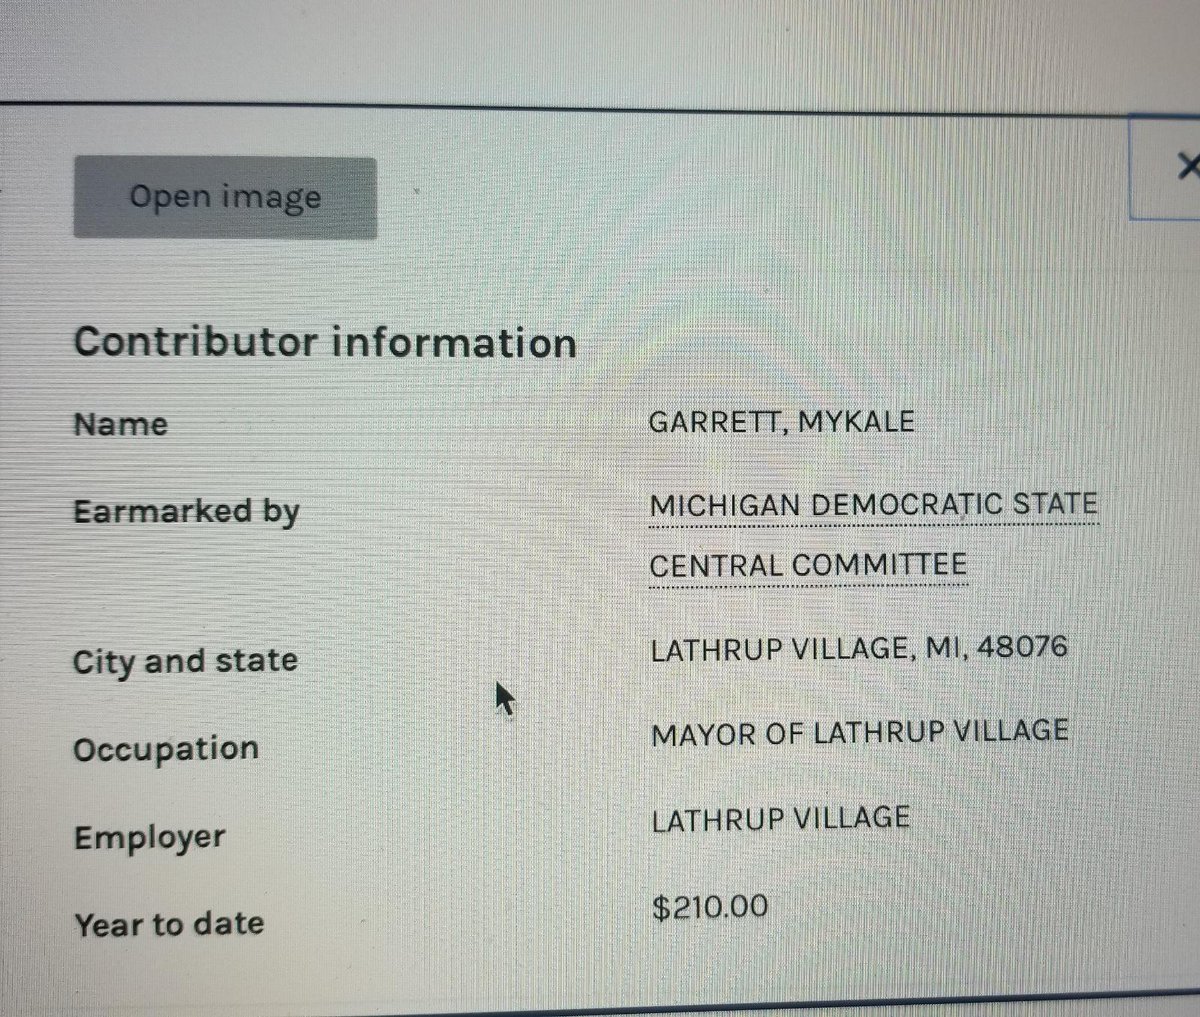 Mykale Garrett, former Dominion project manager, now goes by Kelly Garrett and is the Mayor of Lathrup Village, Michigan. Conveniently left Dominion in 2019 to become involved heavily in Michigan politics having a full understanding of the machines in a swing-state?